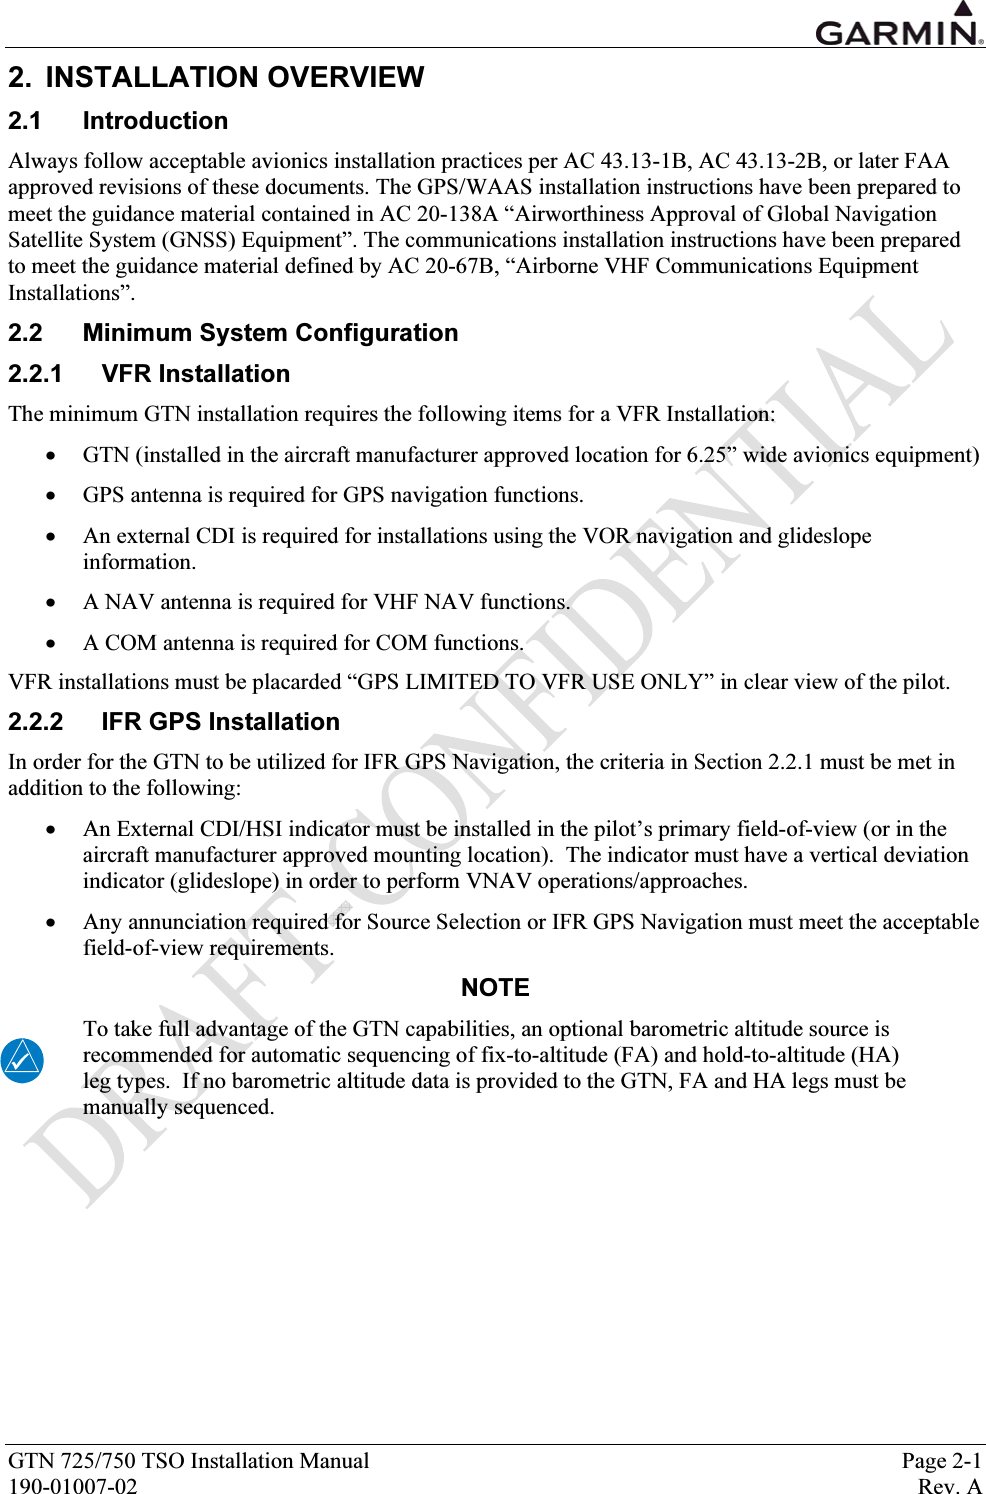  GTN 725/750 TSO Installation Manual  Page 2-1 190-01007-02  Rev. A 2. INSTALLATION OVERVIEW 2.1 Introduction Always follow acceptable avionics installation practices per AC 43.13-1B, AC 43.13-2B, or later FAA approved revisions of these documents. The GPS/WAAS installation instructions have been prepared to meet the guidance material contained in AC 20-138A “Airworthiness Approval of Global Navigation Satellite System (GNSS) Equipment”. The communications installation instructions have been prepared to meet the guidance material defined by AC 20-67B, “Airborne VHF Communications Equipment Installations”.  2.2 Minimum System Configuration 2.2.1 VFR Installation The minimum GTN installation requires the following items for a VFR Installation: • GTN (installed in the aircraft manufacturer approved location for 6.25” wide avionics equipment) • GPS antenna is required for GPS navigation functions.  • An external CDI is required for installations using the VOR navigation and glideslope information.  • A NAV antenna is required for VHF NAV functions.  • A COM antenna is required for COM functions.  VFR installations must be placarded “GPS LIMITED TO VFR USE ONLY” in clear view of the pilot. 2.2.2  IFR GPS Installation In order for the GTN to be utilized for IFR GPS Navigation, the criteria in Section 2.2.1 must be met in addition to the following:  • An External CDI/HSI indicator must be installed in the pilot’s primary field-of-view (or in the aircraft manufacturer approved mounting location).  The indicator must have a vertical deviation indicator (glideslope) in order to perform VNAV operations/approaches. • Any annunciation required for Source Selection or IFR GPS Navigation must meet the acceptable field-of-view requirements. NOTE To take full advantage of the GTN capabilities, an optional barometric altitude source is recommended for automatic sequencing of fix-to-altitude (FA) and hold-to-altitude (HA) leg types.  If no barometric altitude data is provided to the GTN, FA and HA legs must be manually sequenced.  